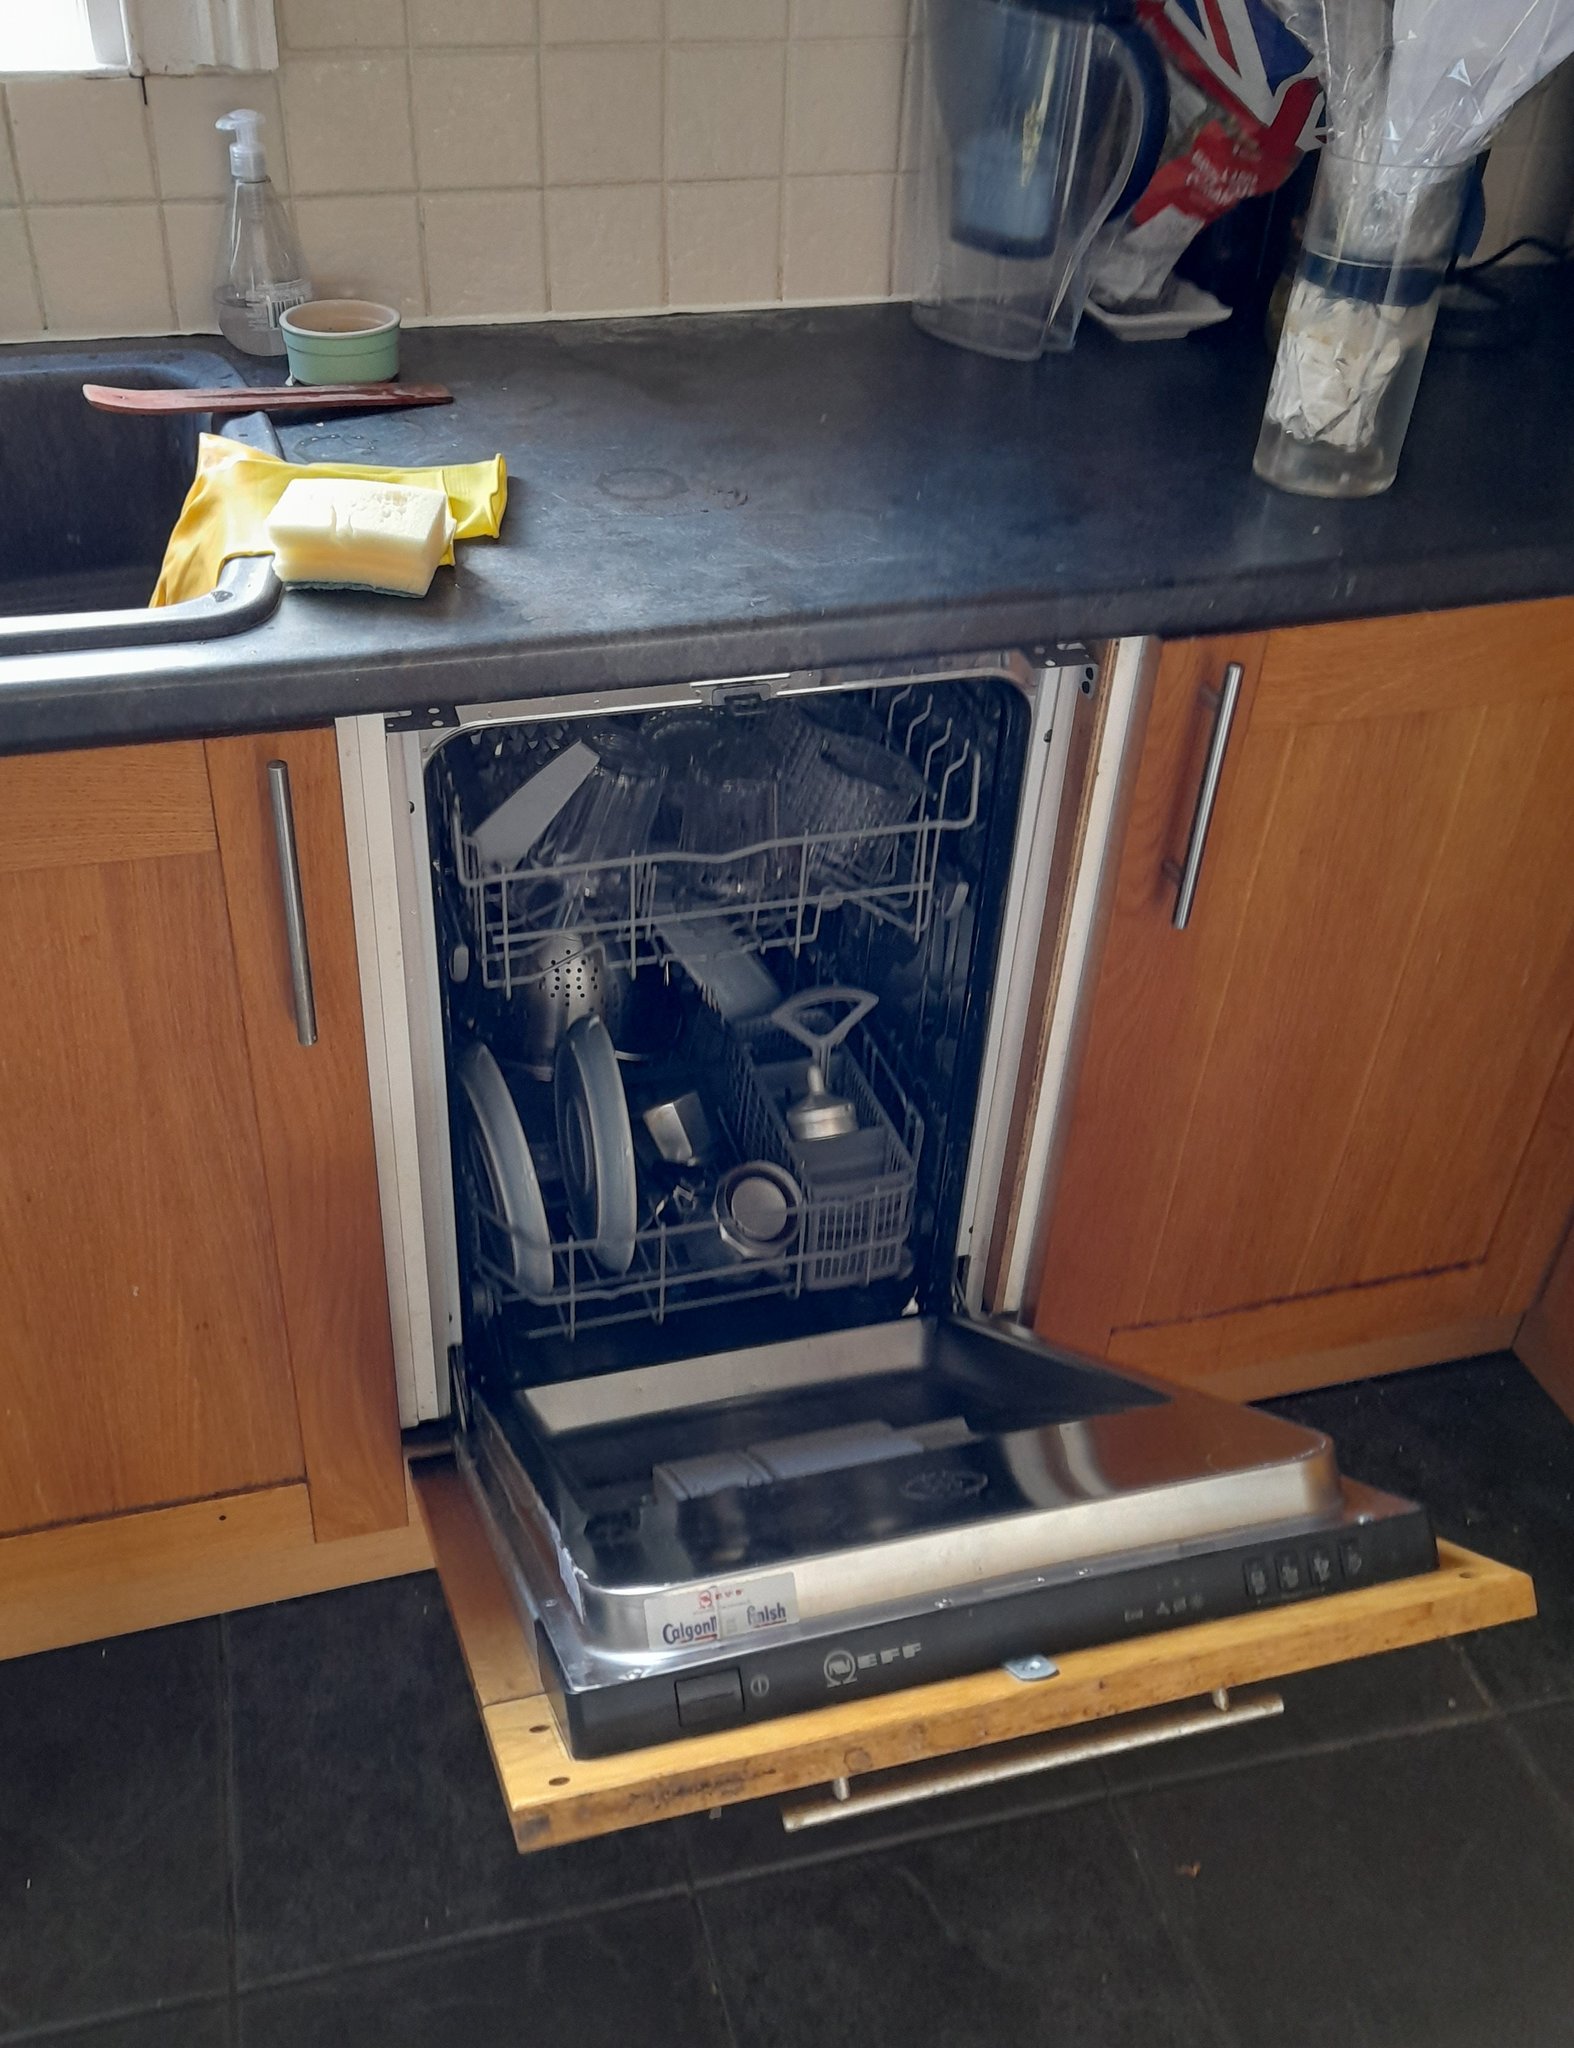 Twitter User ‘In Shock’ to Investigate cross-test Hidden Dishwasher He Did not Look for Years